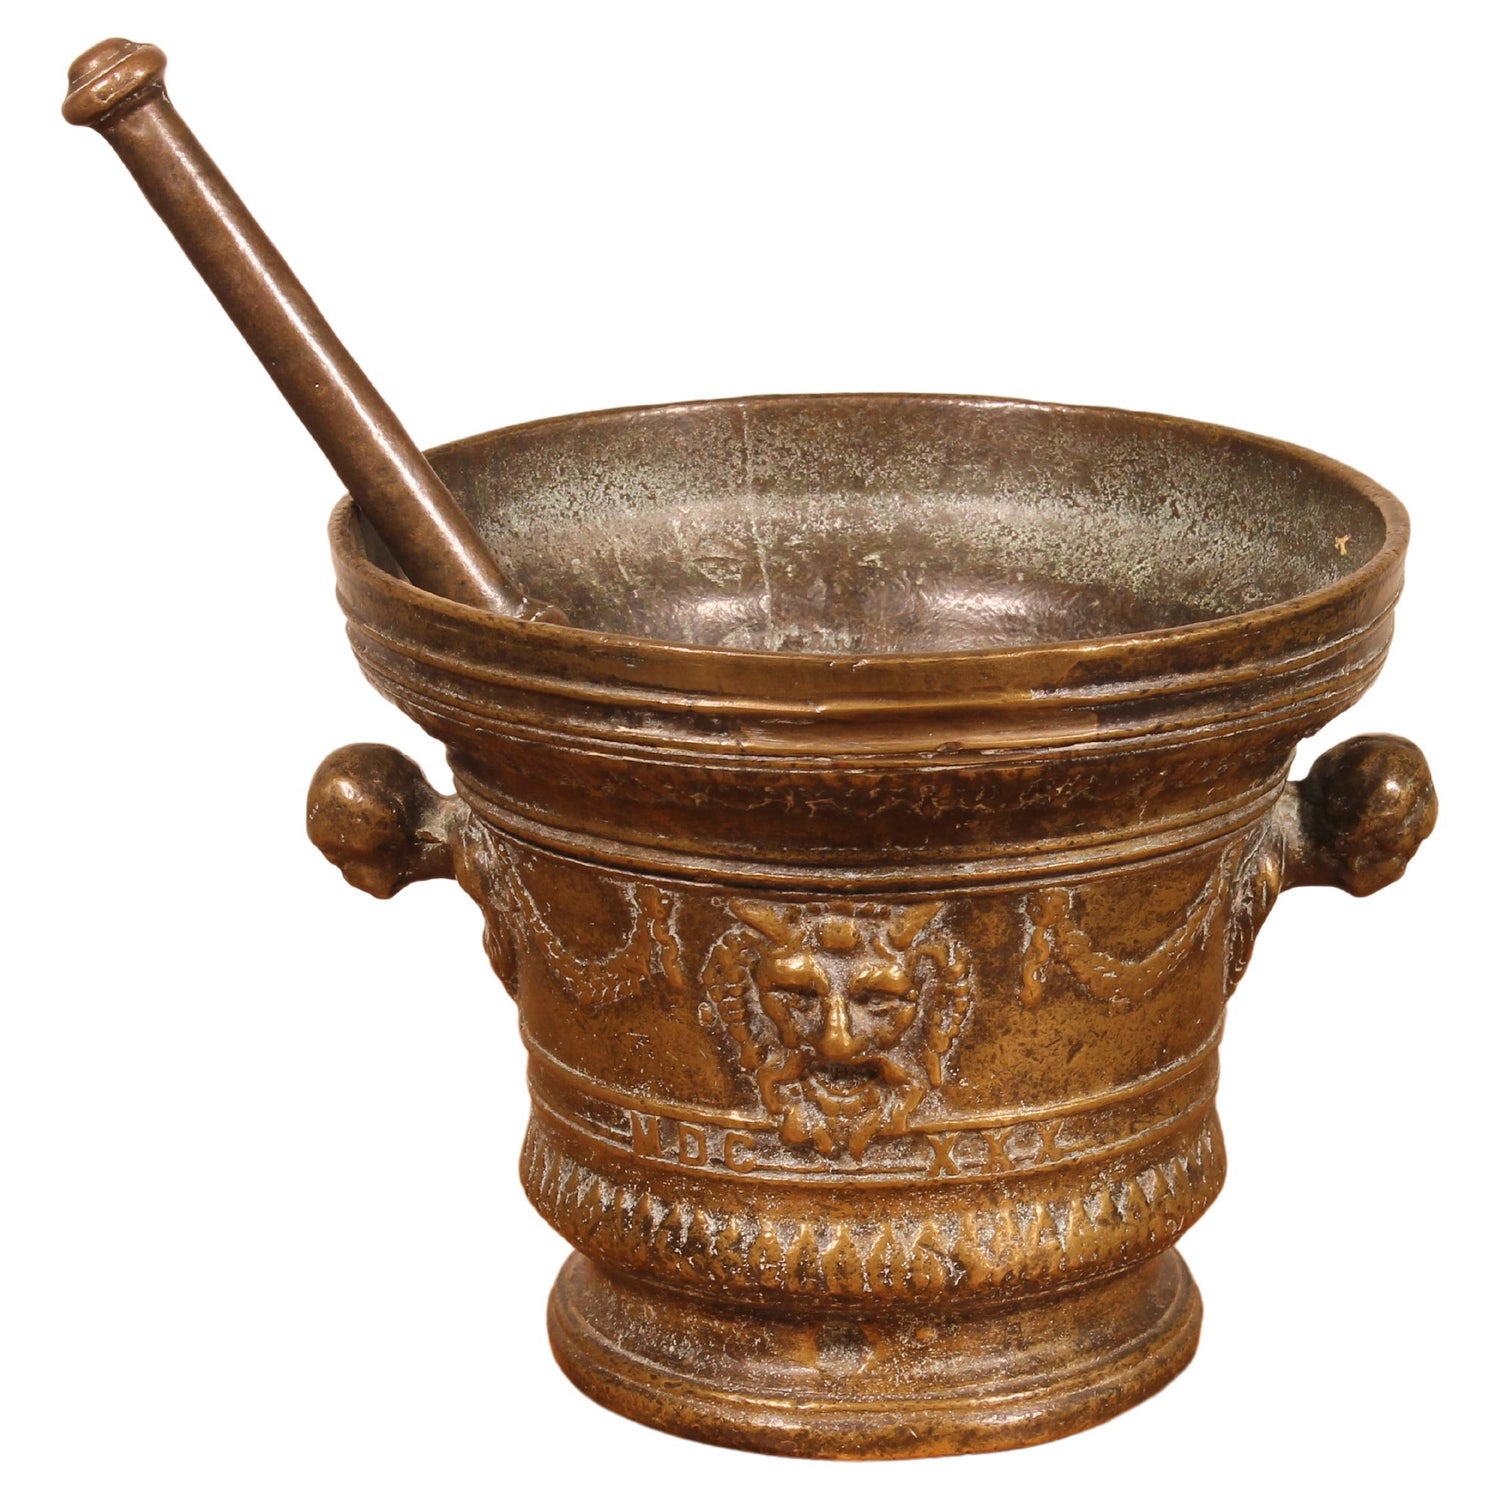 1820s French Cast Iron Mortar For Sale at 1stDibs